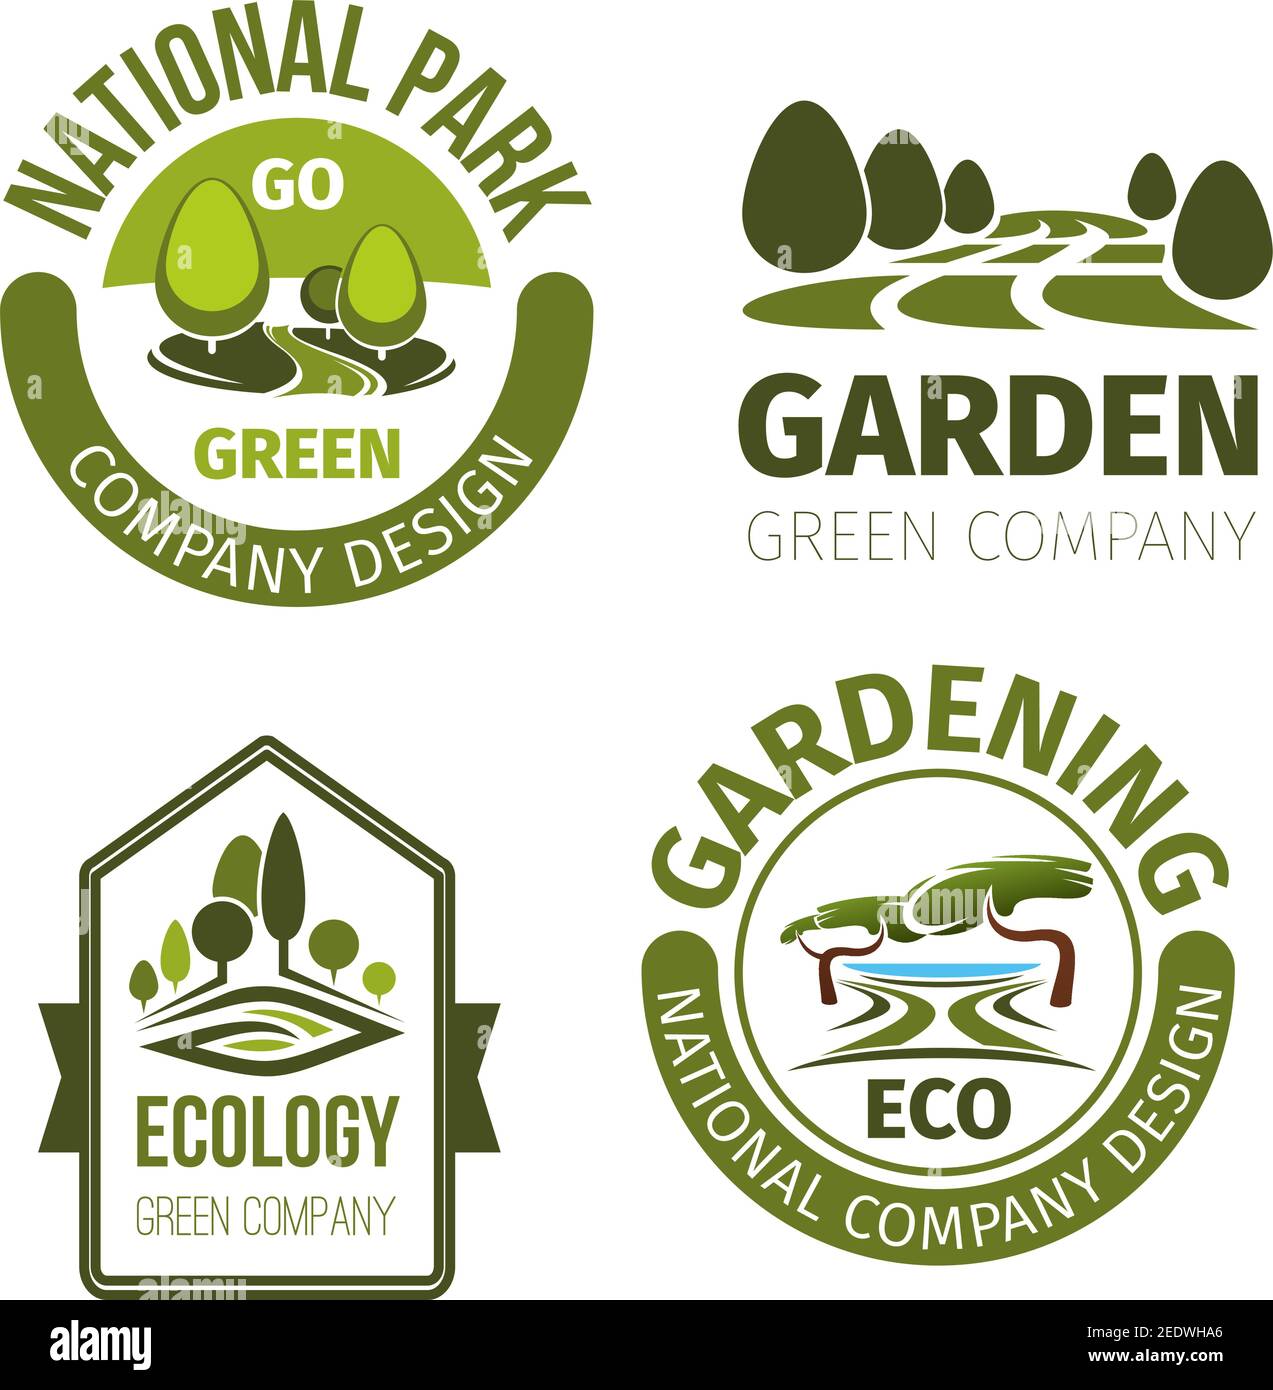 Eco park or green garden vector icons set. Landscape design and urban gardening award symbols of trees woodland for eco building company or city horti Stock Vector